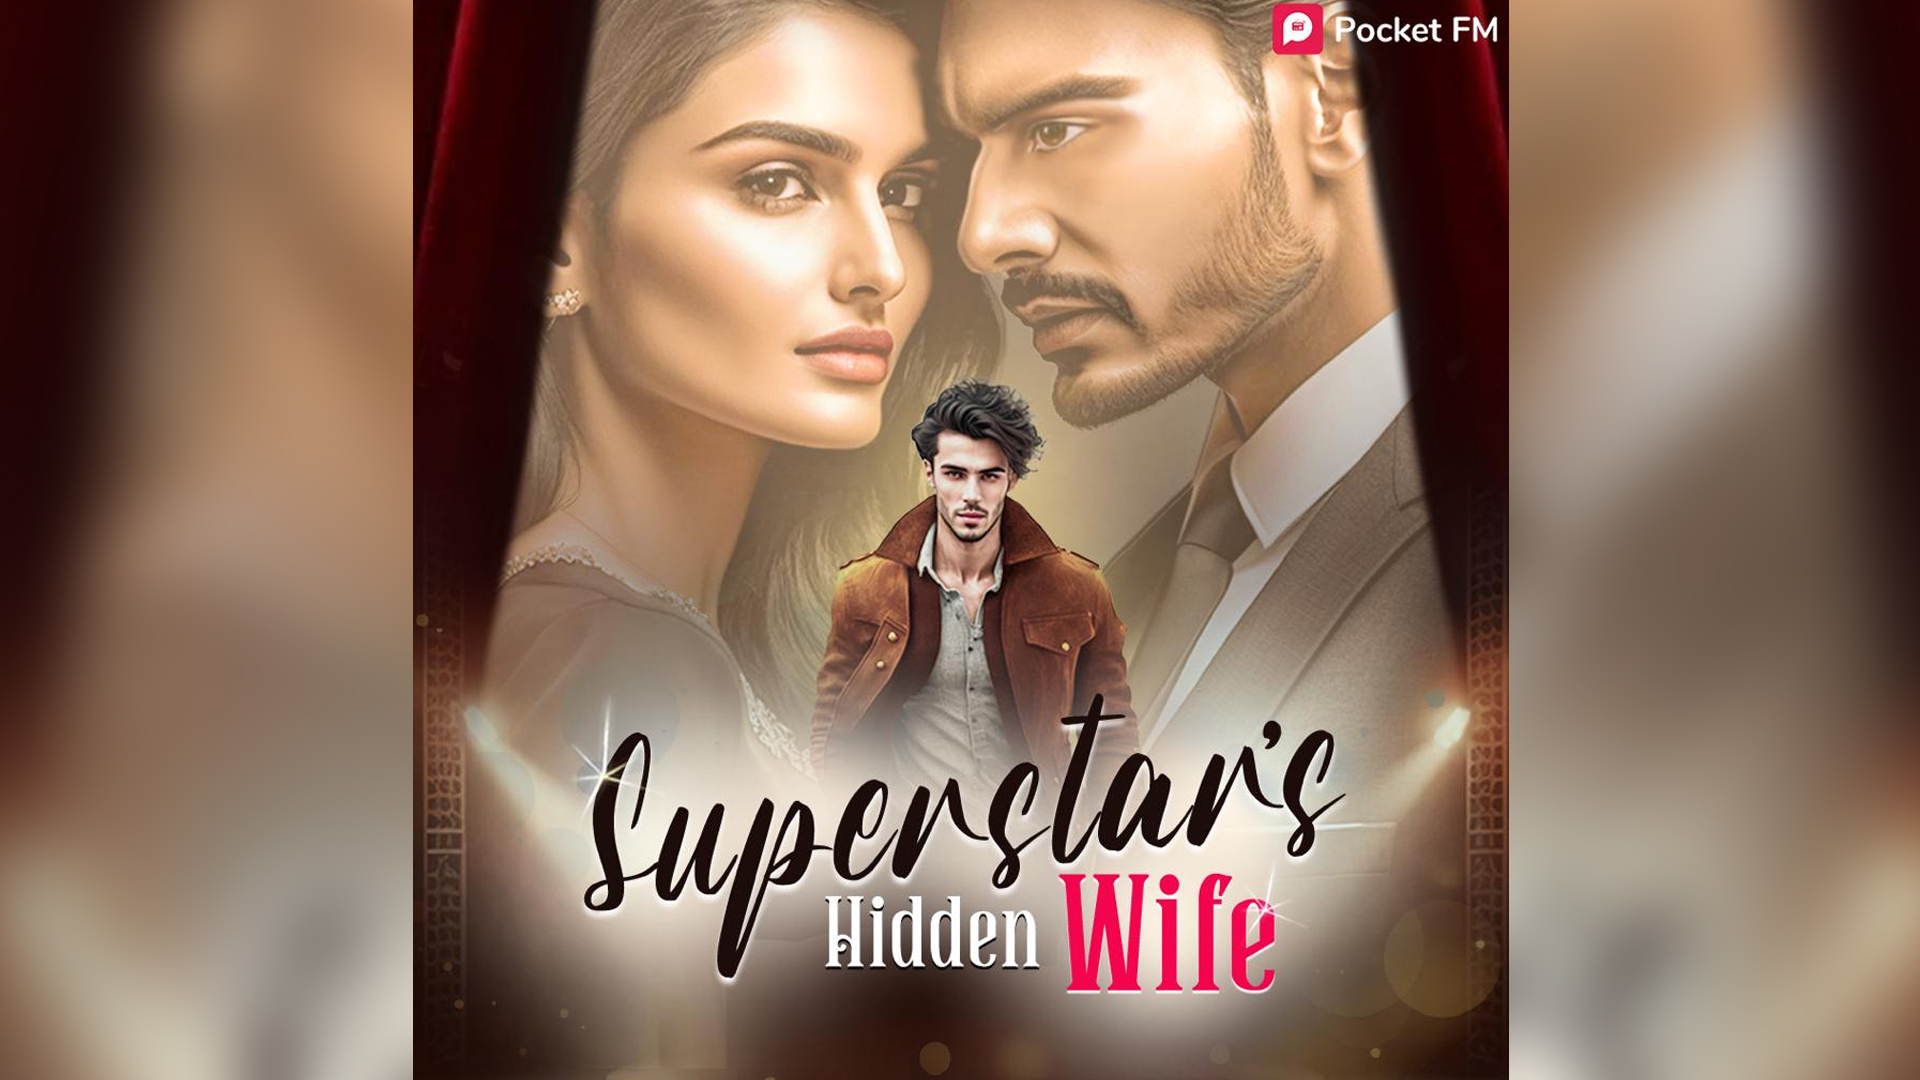 Pocket FM’s audio series ‘Superstar’s Hidden Wife’ is a Rollercoaster of Emotions and Unforeseen Twists!